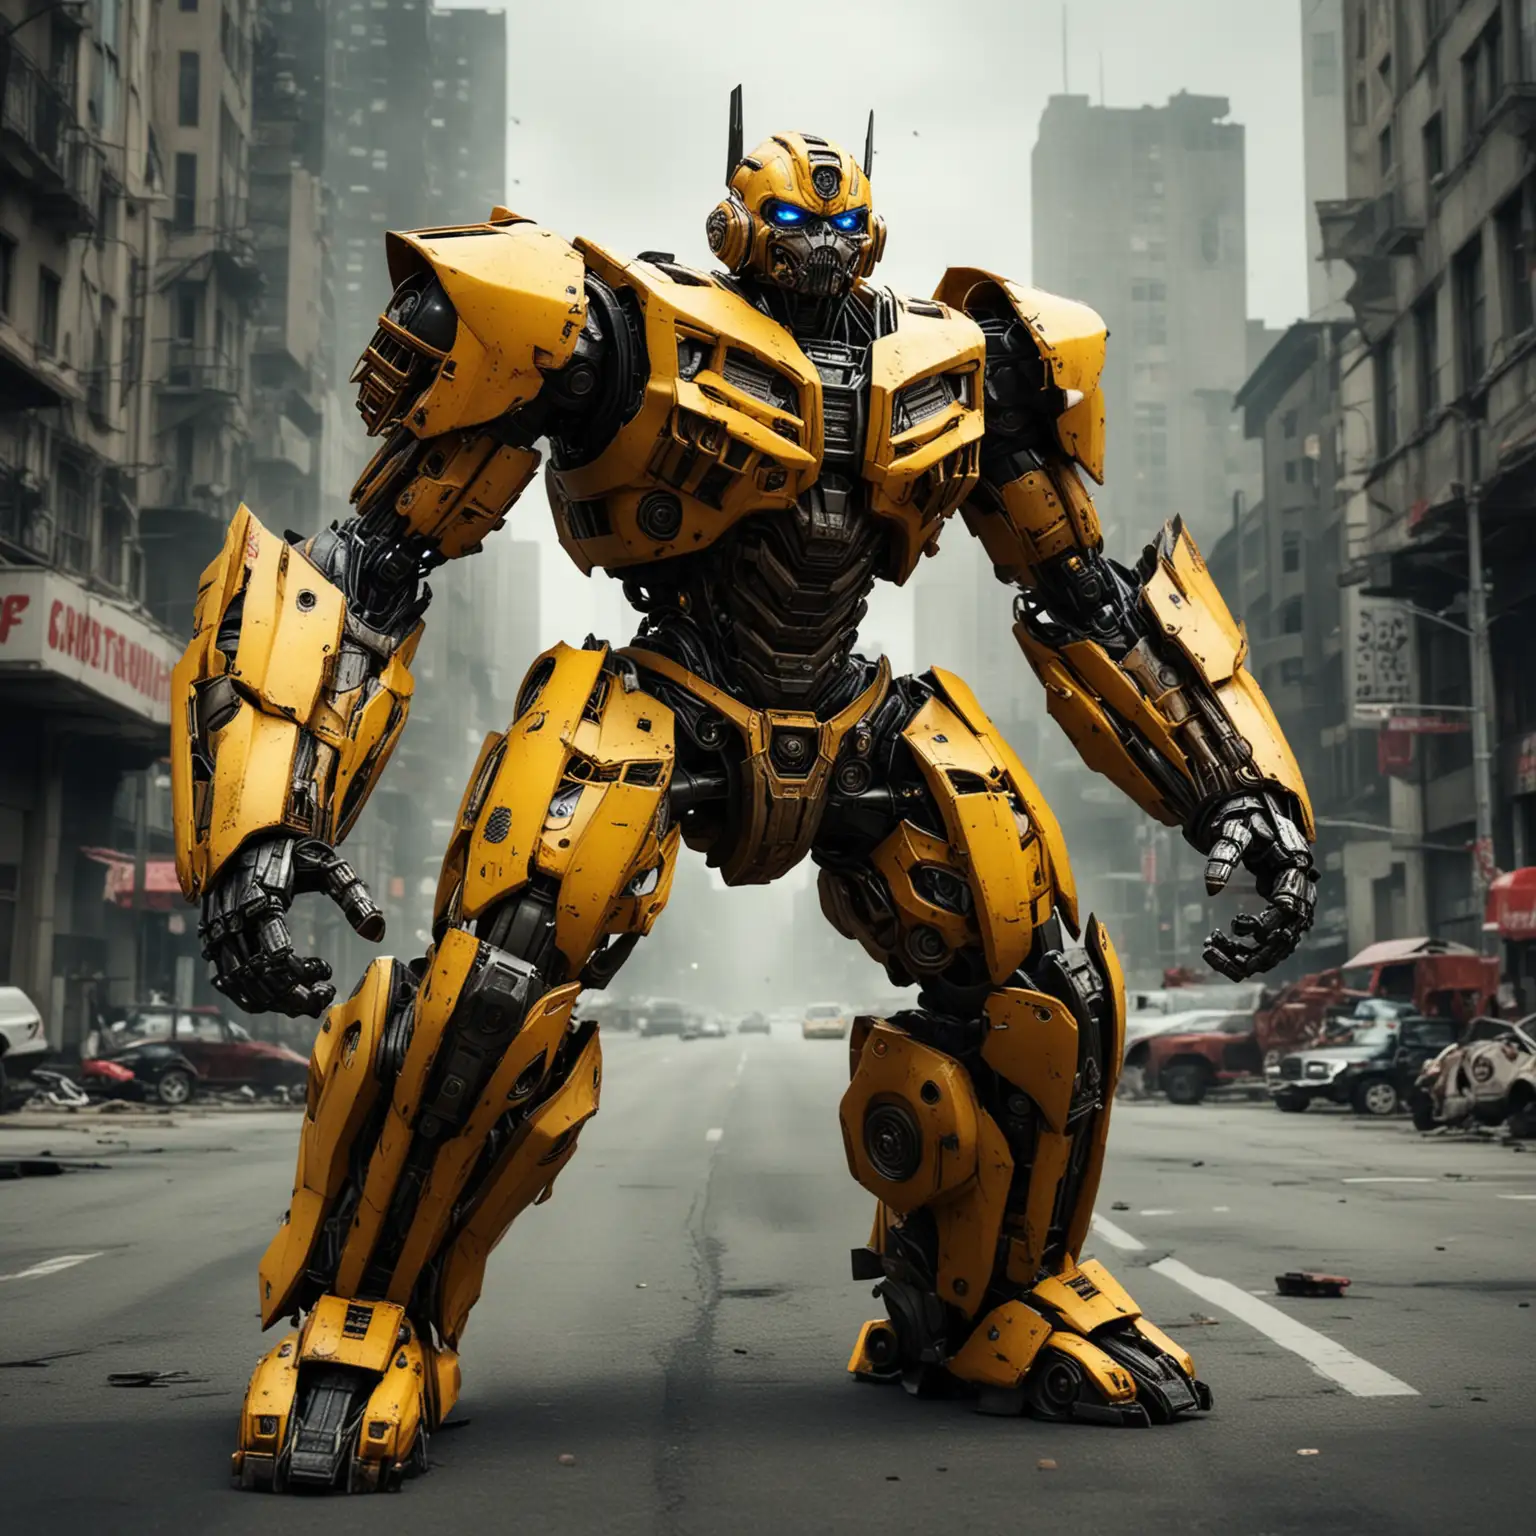 bumblebee transformer in scary city